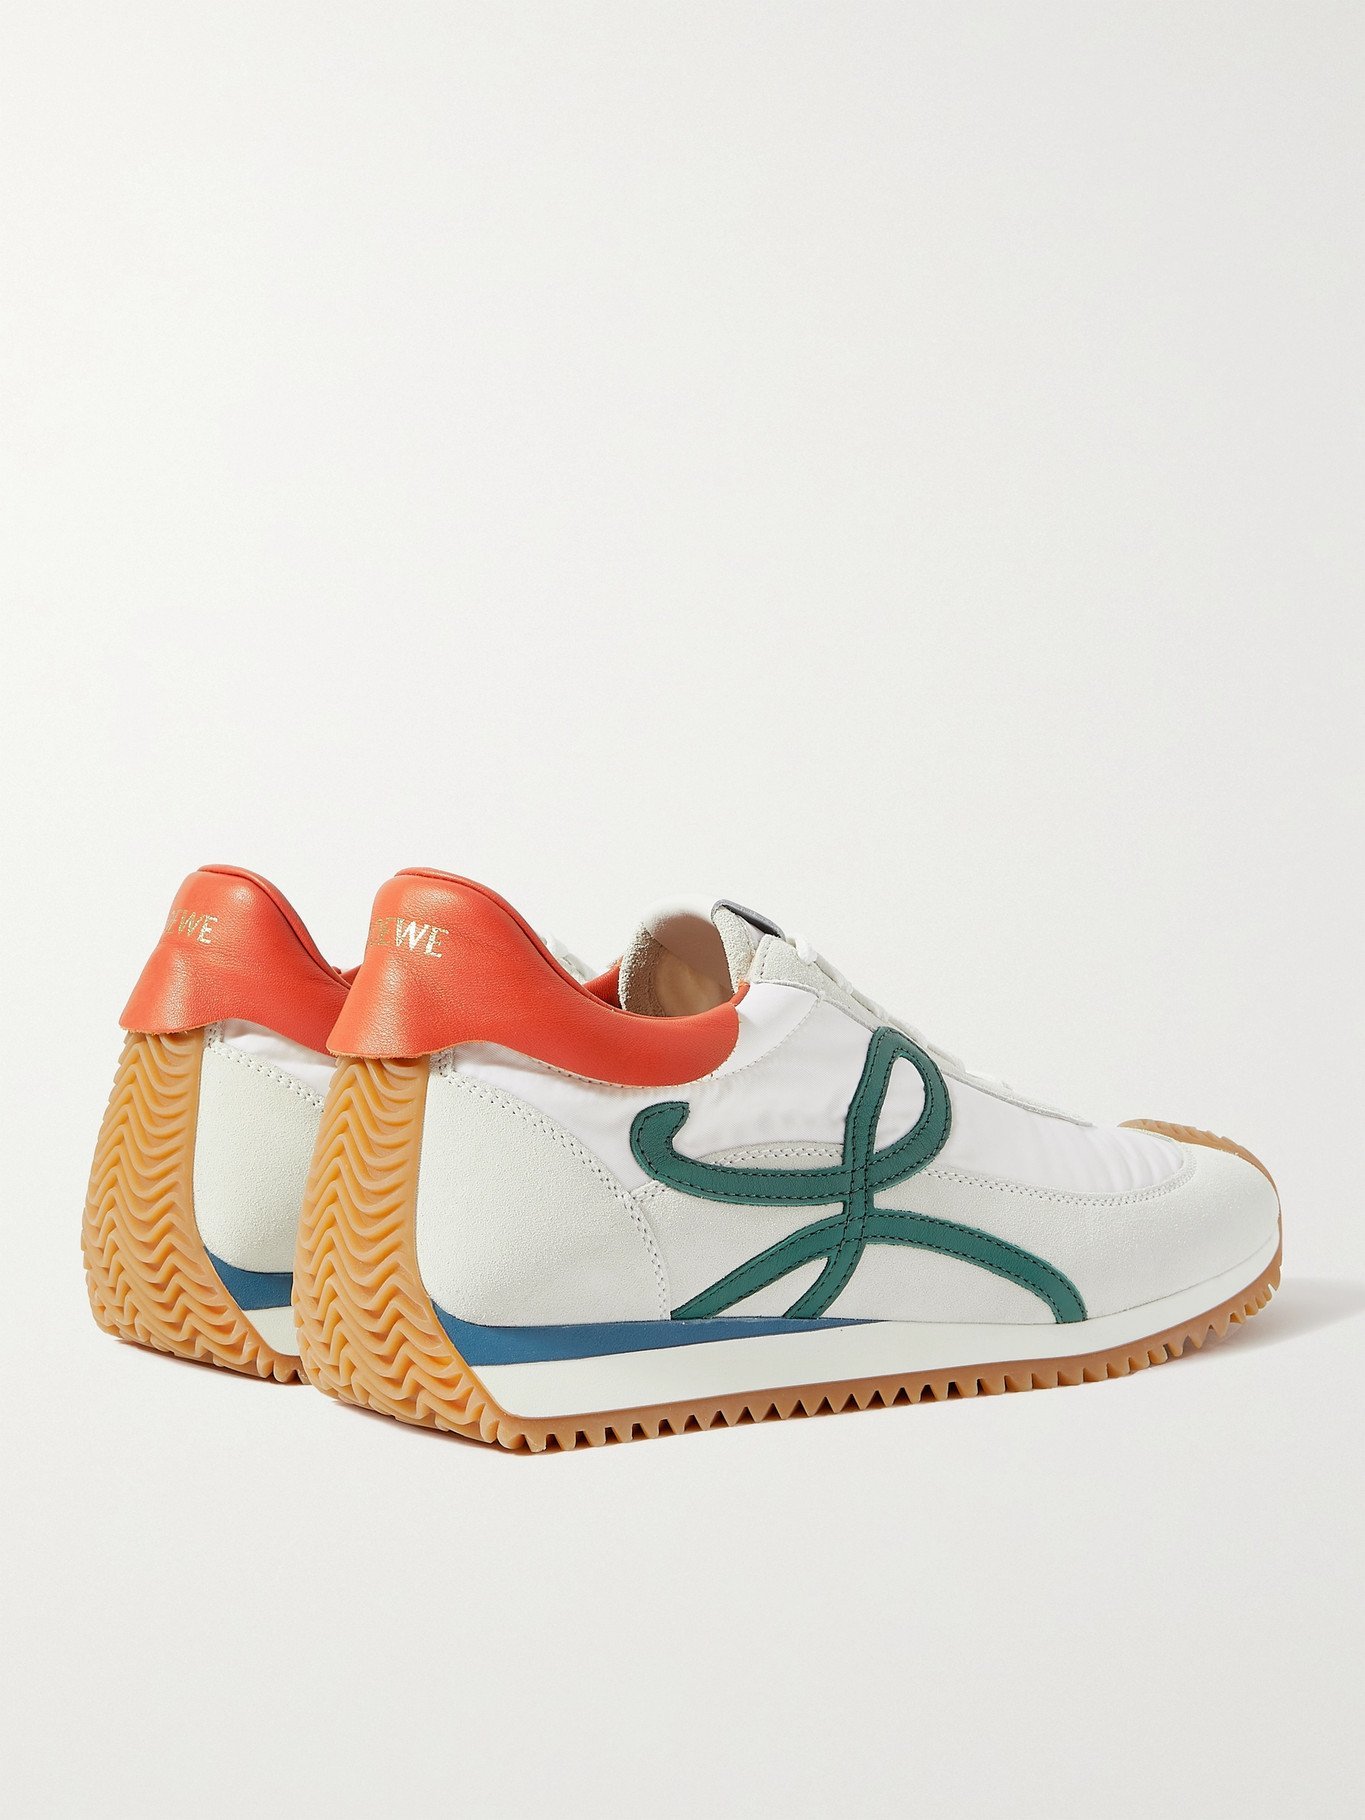 LOEWE - Paula's Ibiza Flow Runner Leather-Trimmed Nylon and Suede 